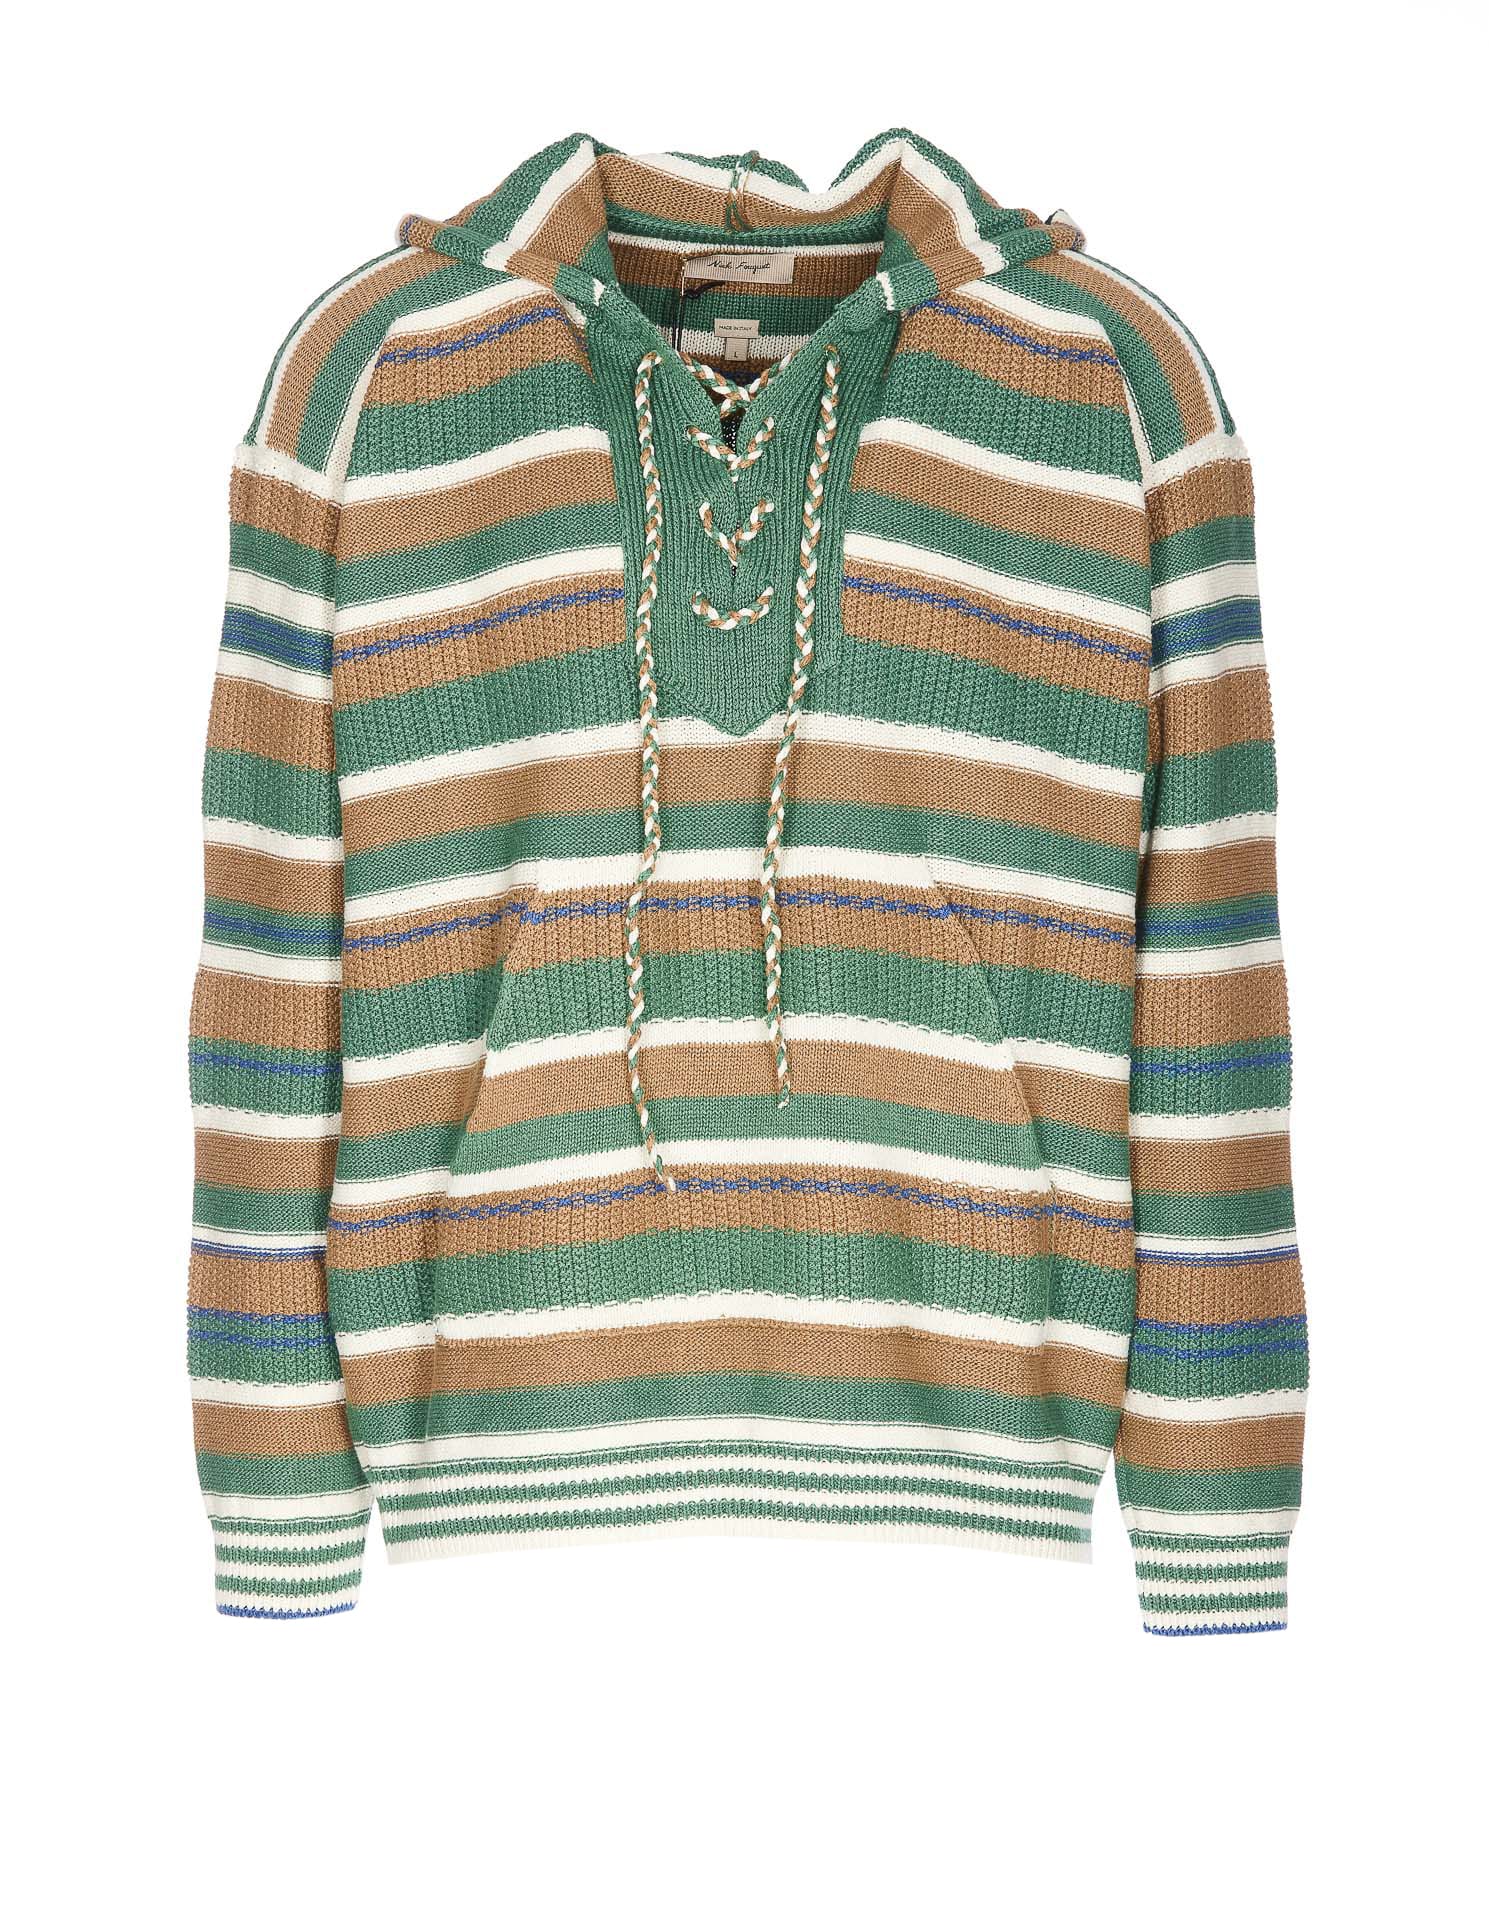 NICK FOUQUET HOODED SWEATER